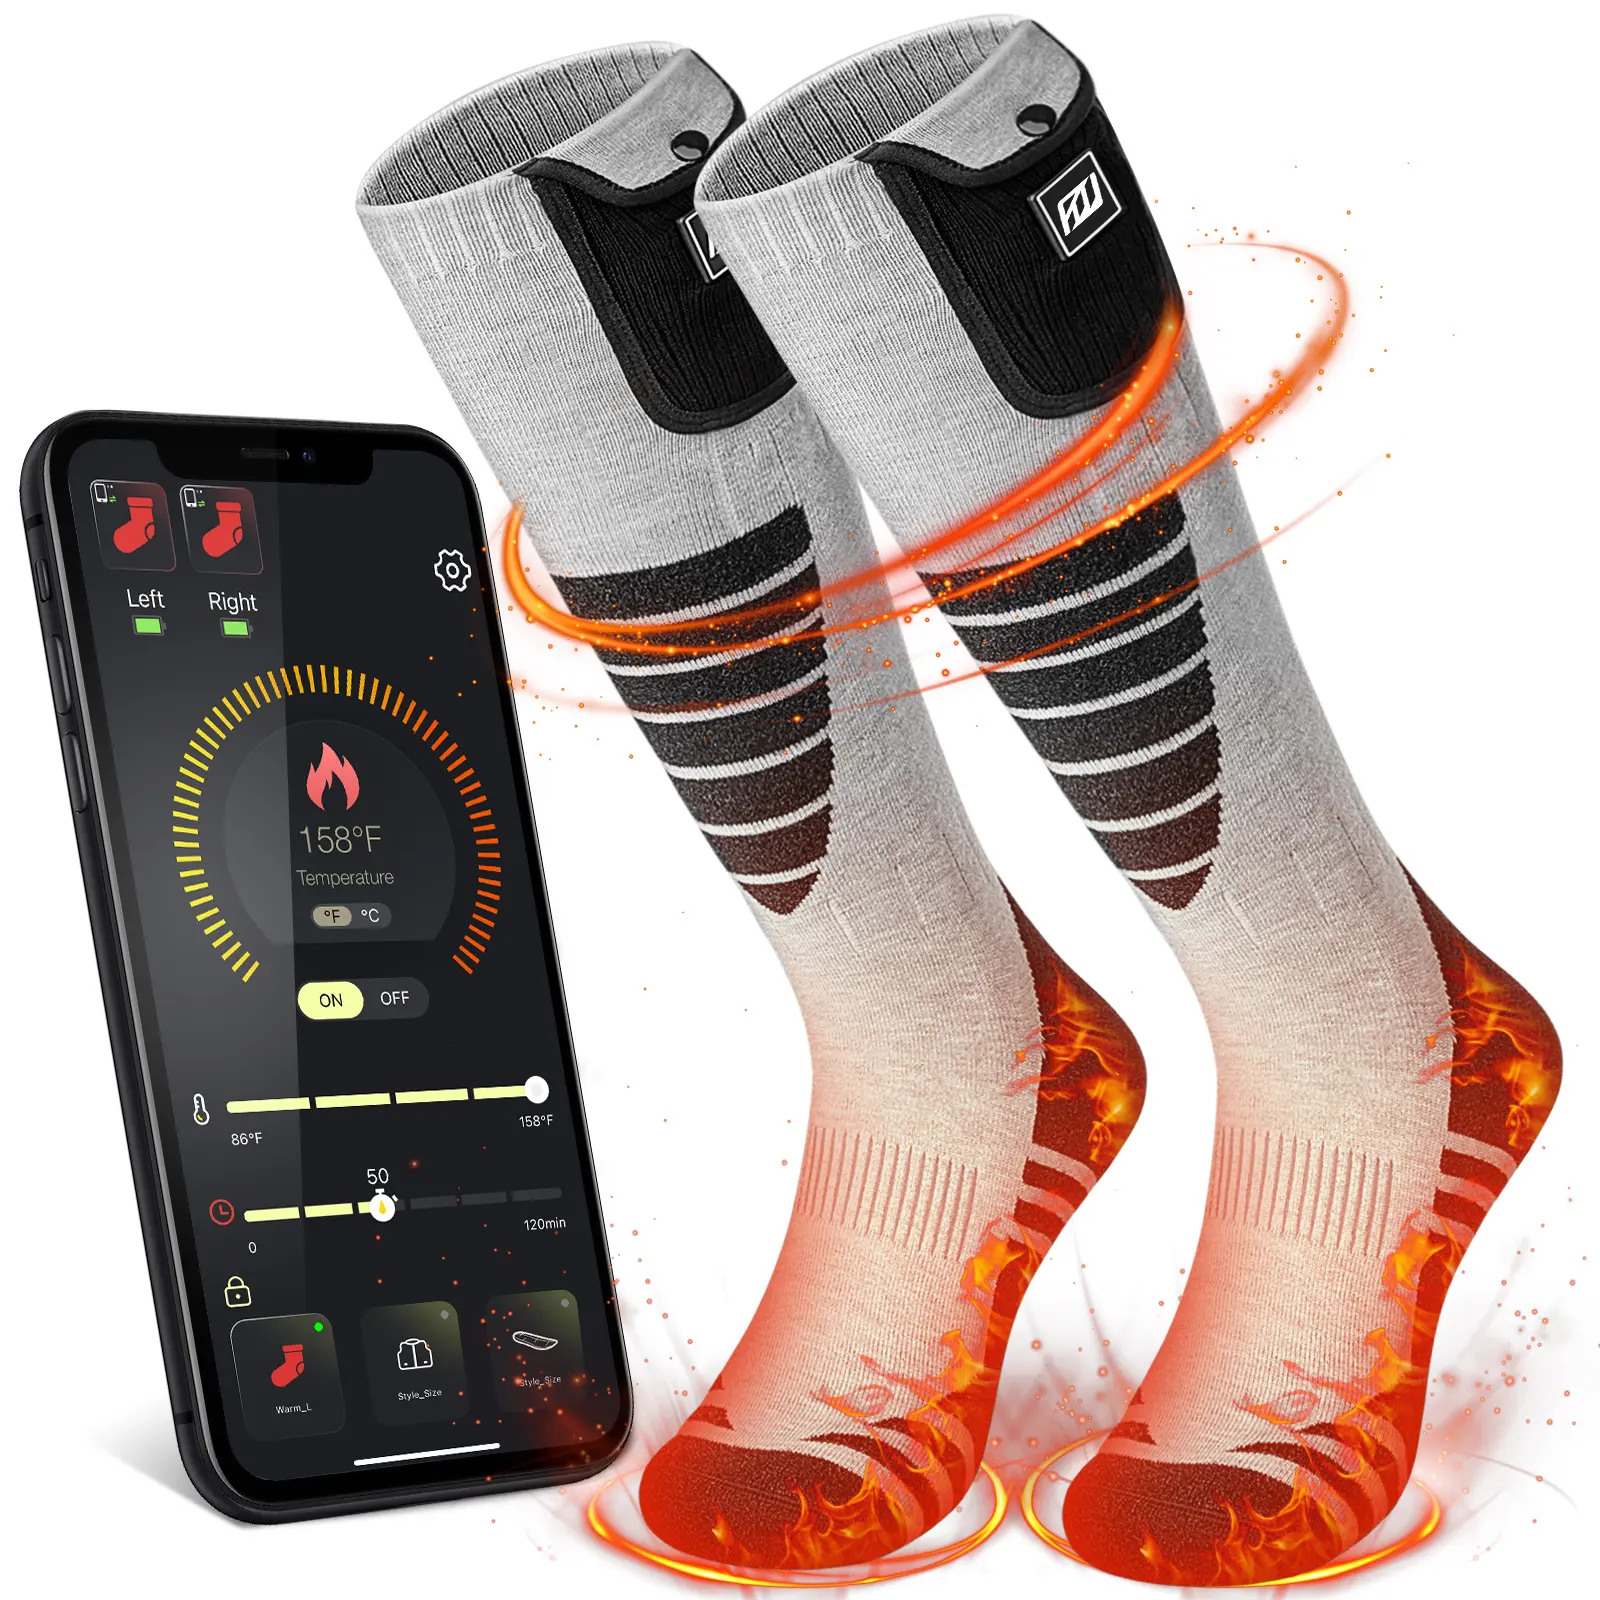 App Remote Control Washable Foot Electric Heated Socks for Winter Hunting Skiing Camping Foot Warmers